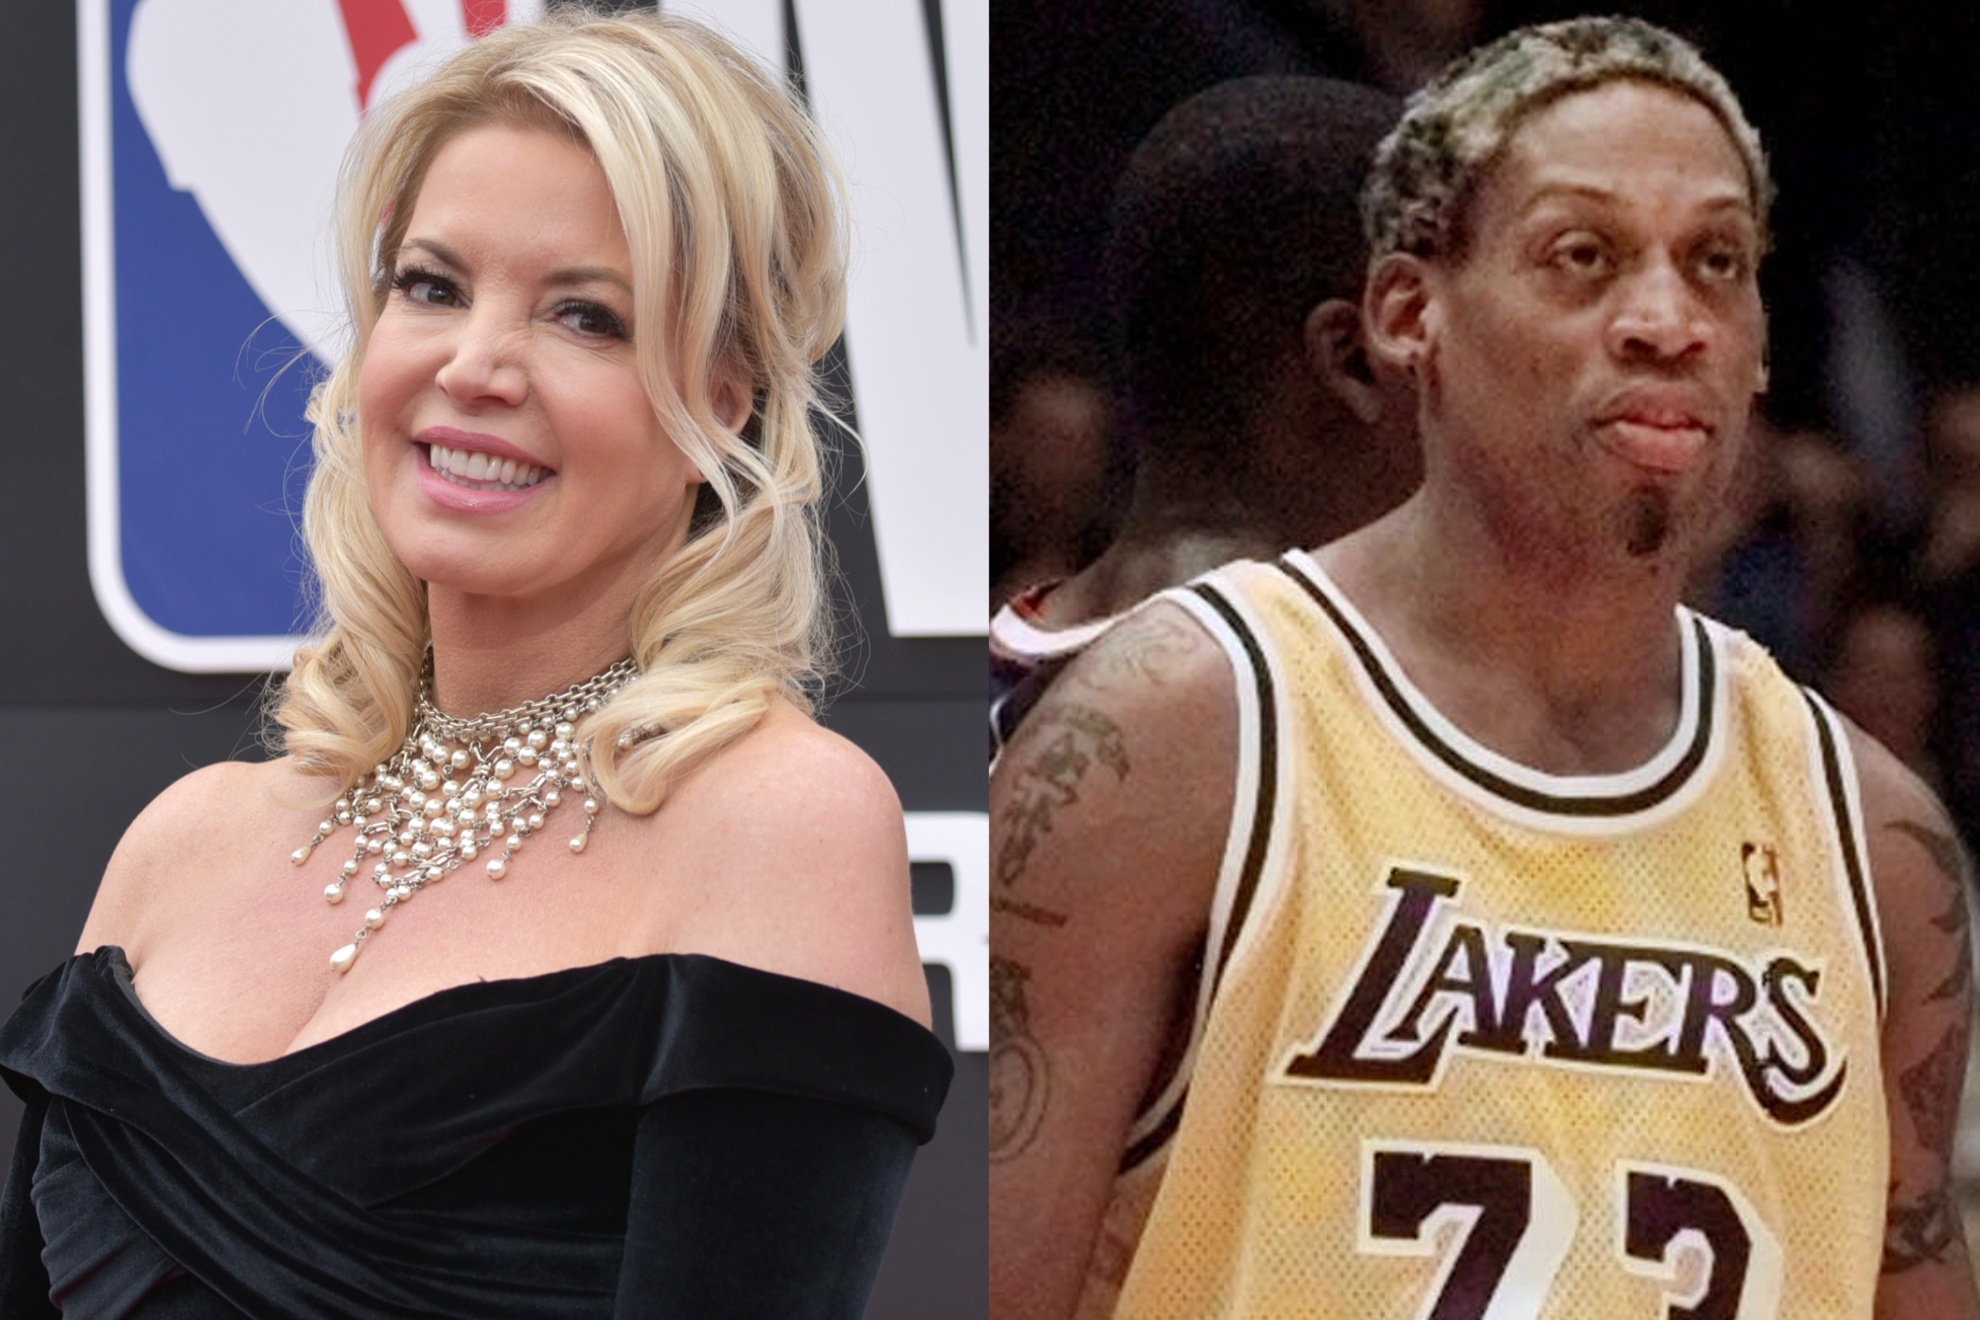 Los Angeles Lakers owner, Jeanie Buss, and former team star Dennis Rodman.